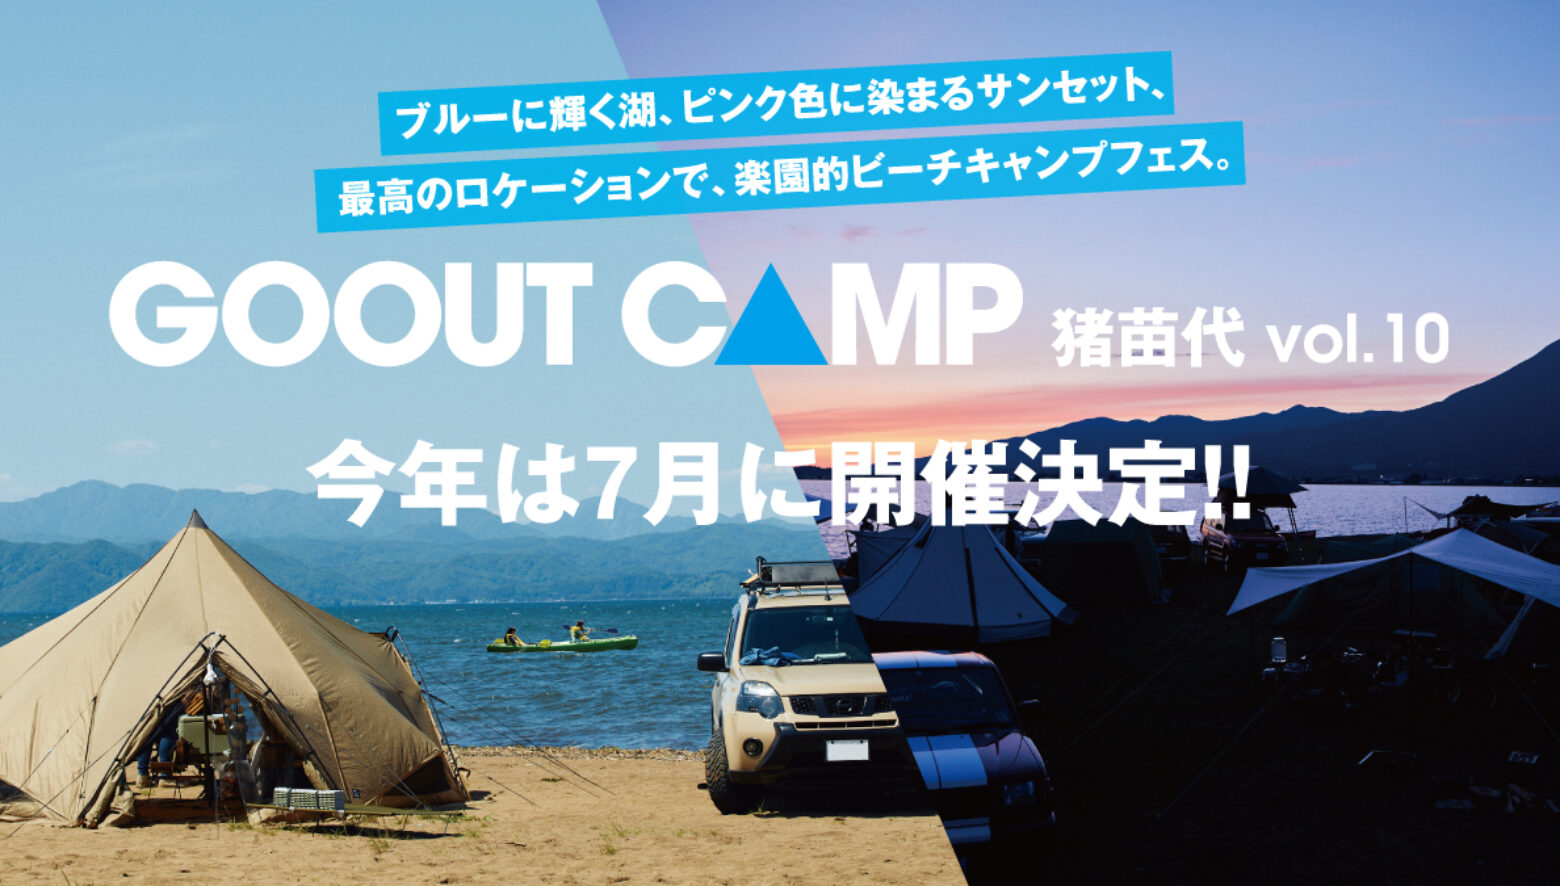 GO OUT CAMP 猪苗代 vol.10、今年は7月に開催決定!! 猪苗代湖畔でビーチキャンプフェスを楽しもう。